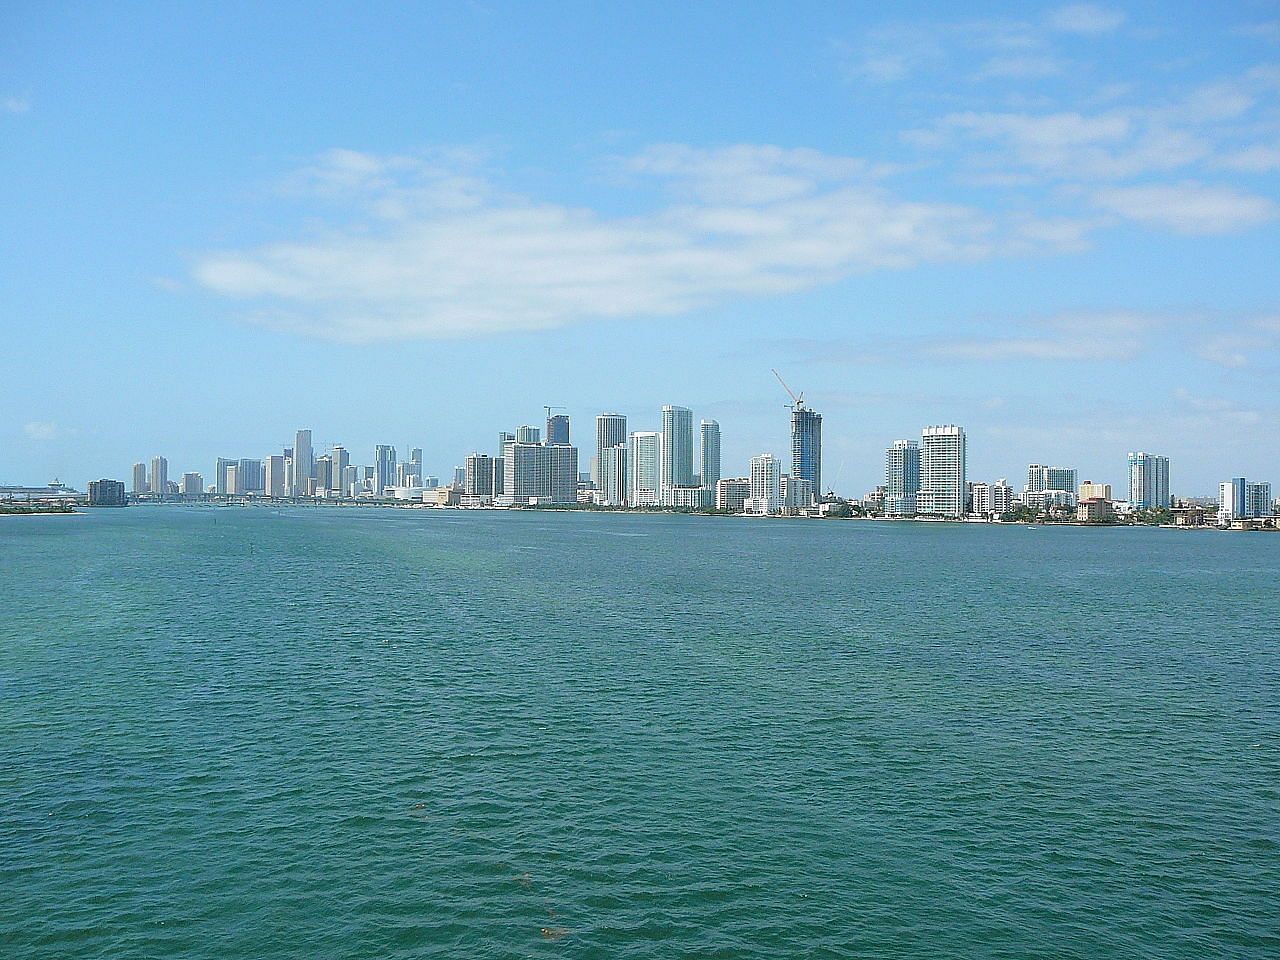 Wade&#039;s property was located in Biscayne Bay and was sold for $22 million (Image via Wikimedia)